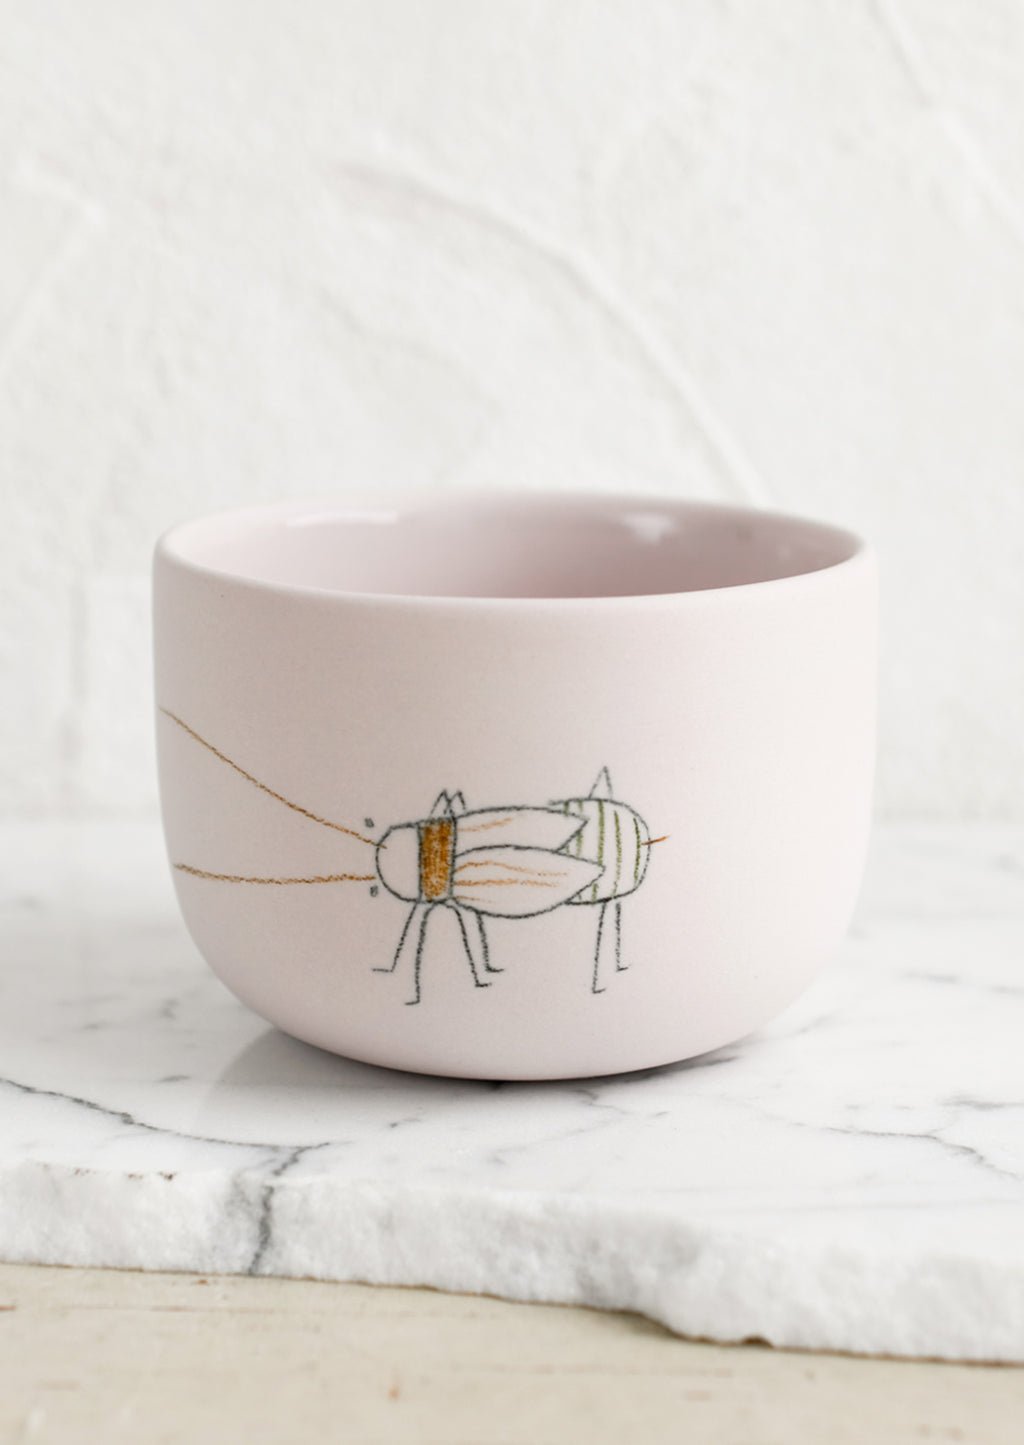 Medium / Beetle / Blush: A short and wide pink porcelain cup with beetle sketch.